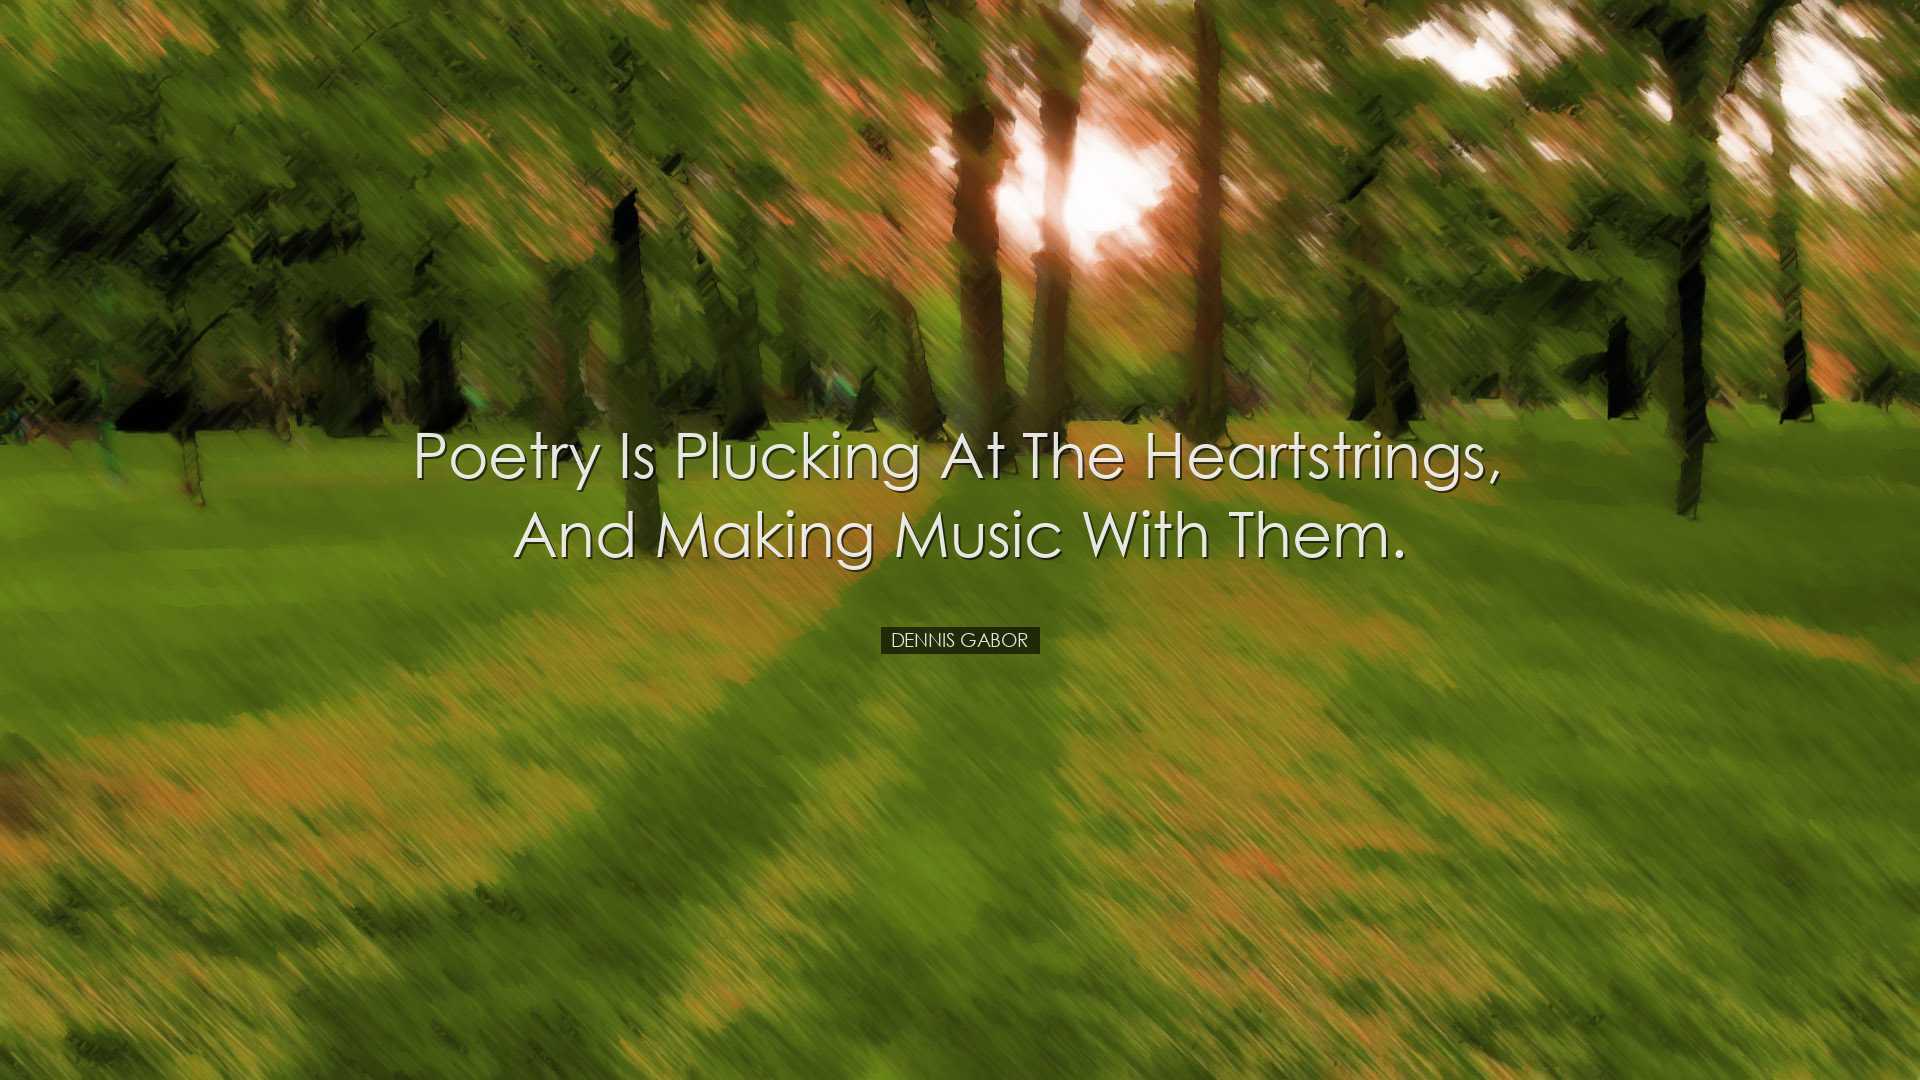 Poetry is plucking at the heartstrings, and making music with them